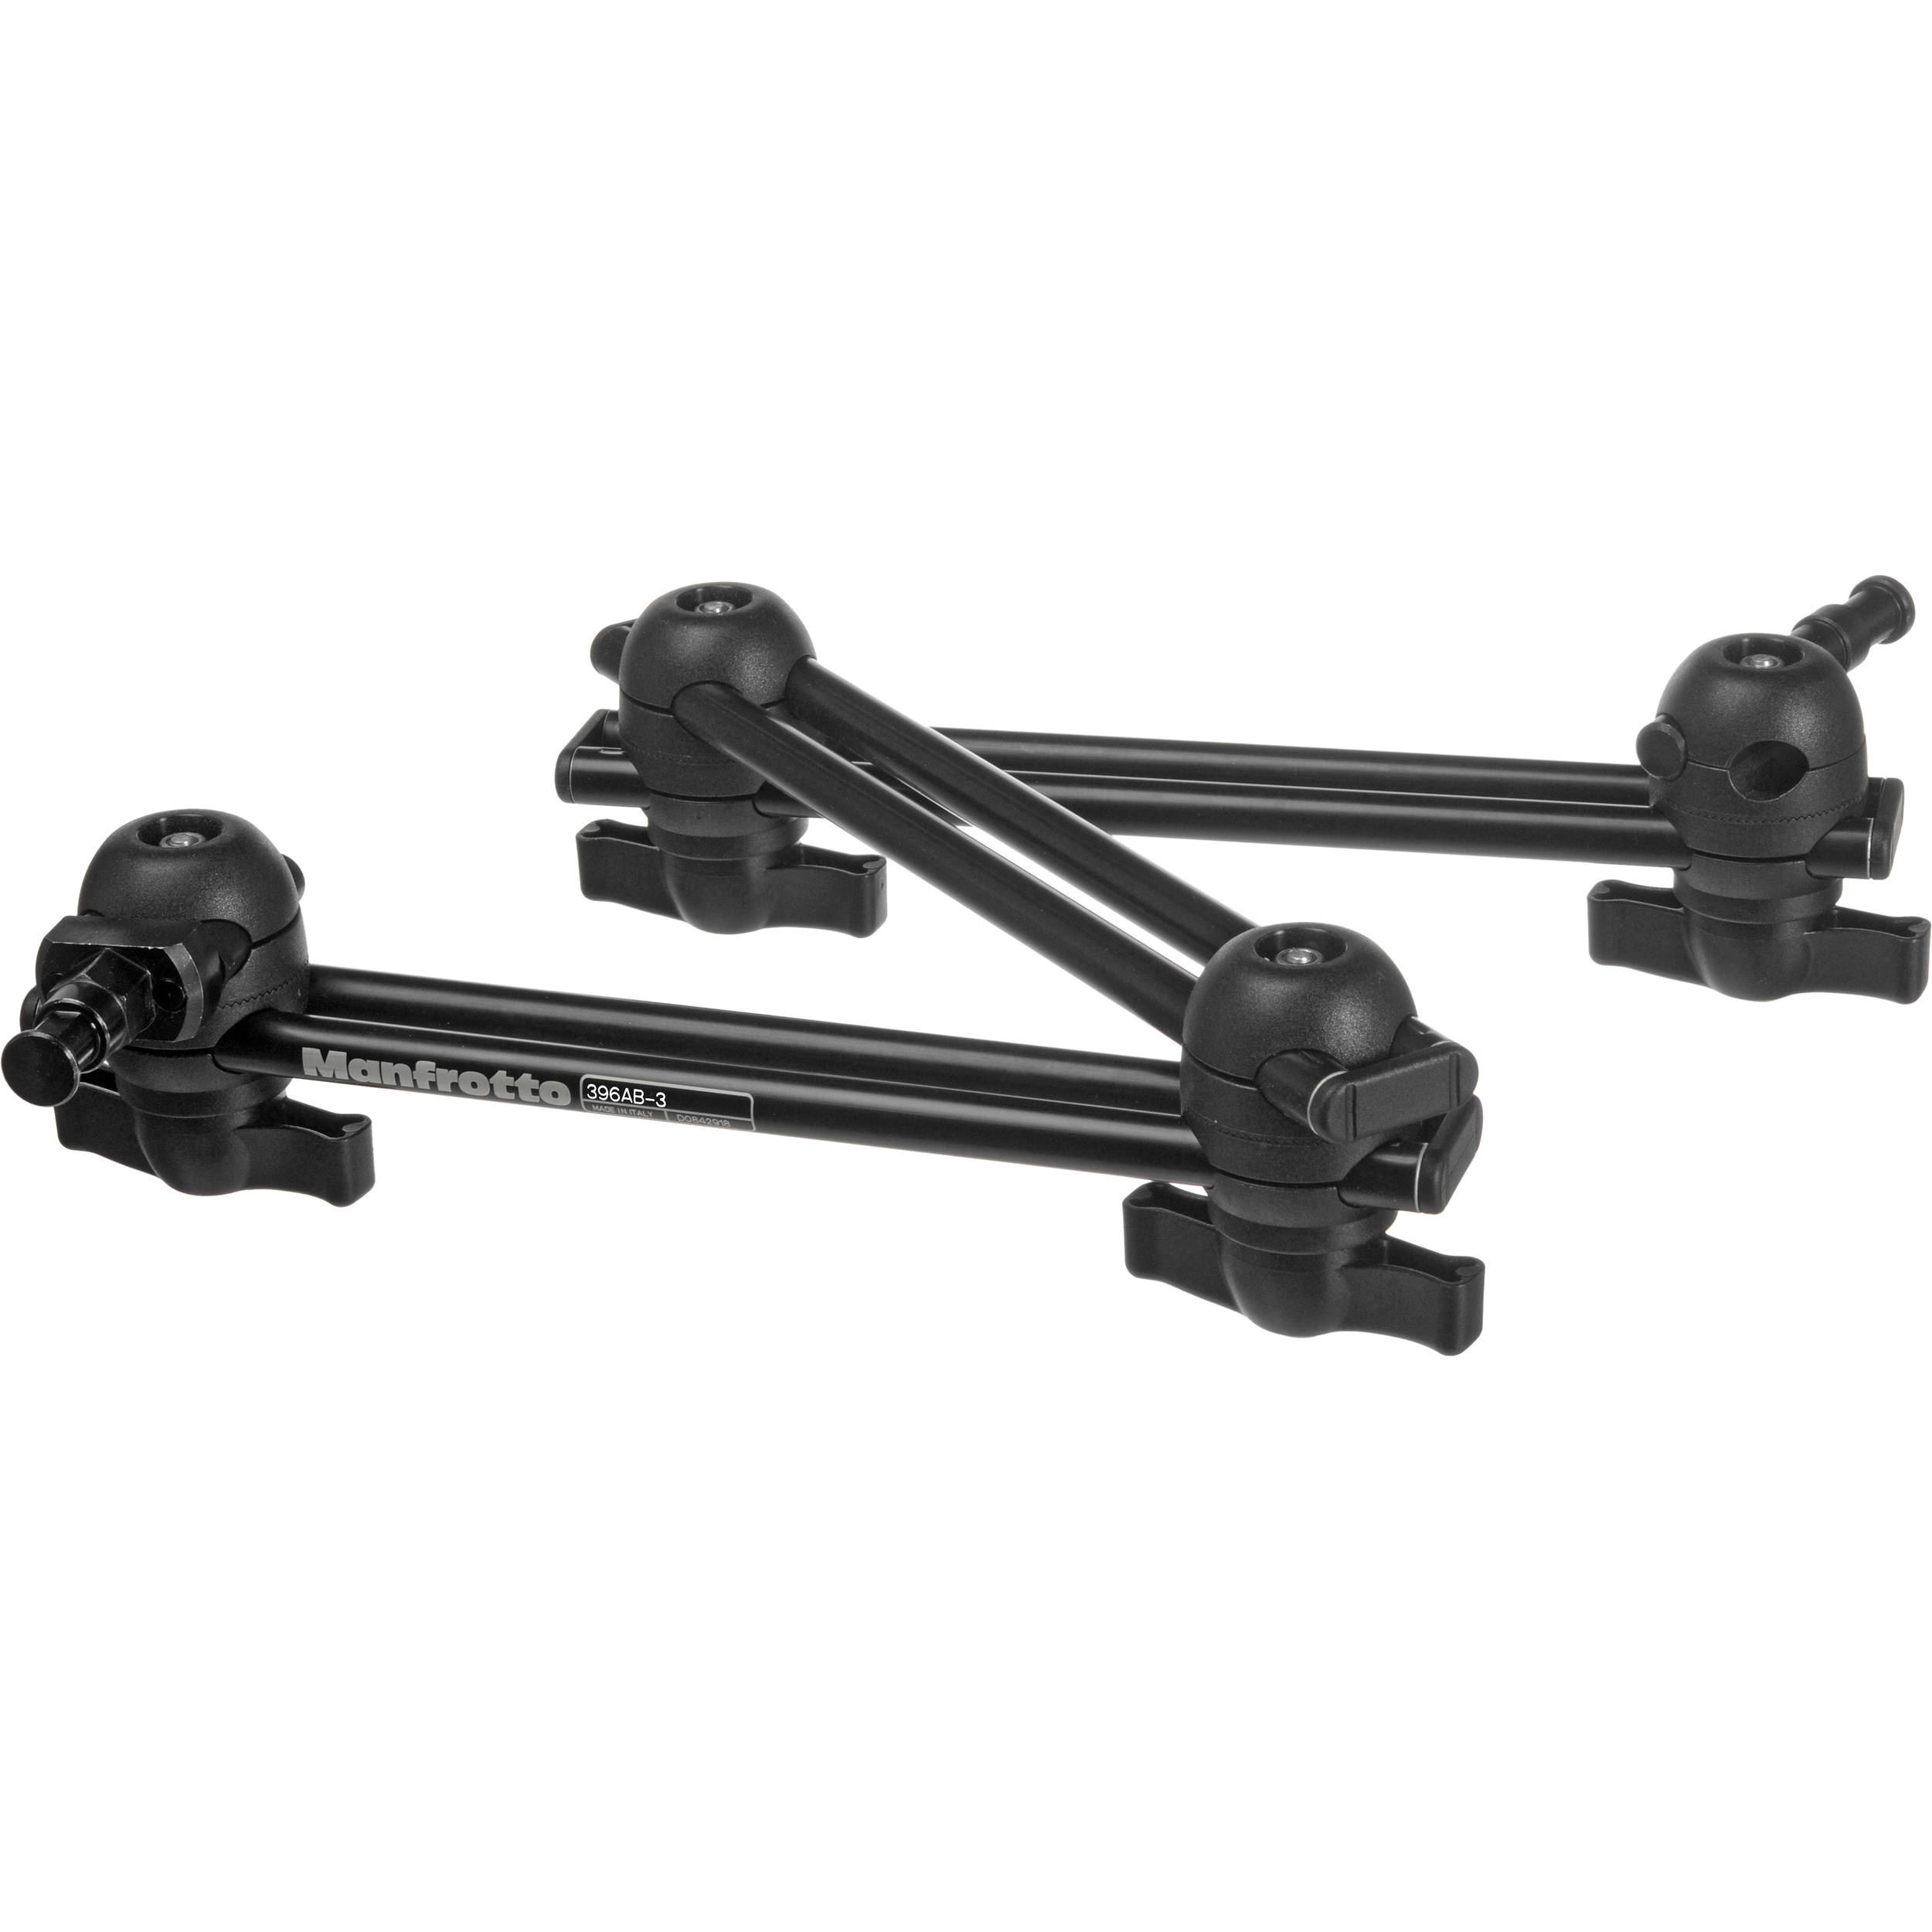 Manfrotto 396AB-3 Double Articulated Arm - 3 Sections Without Camera Bracket